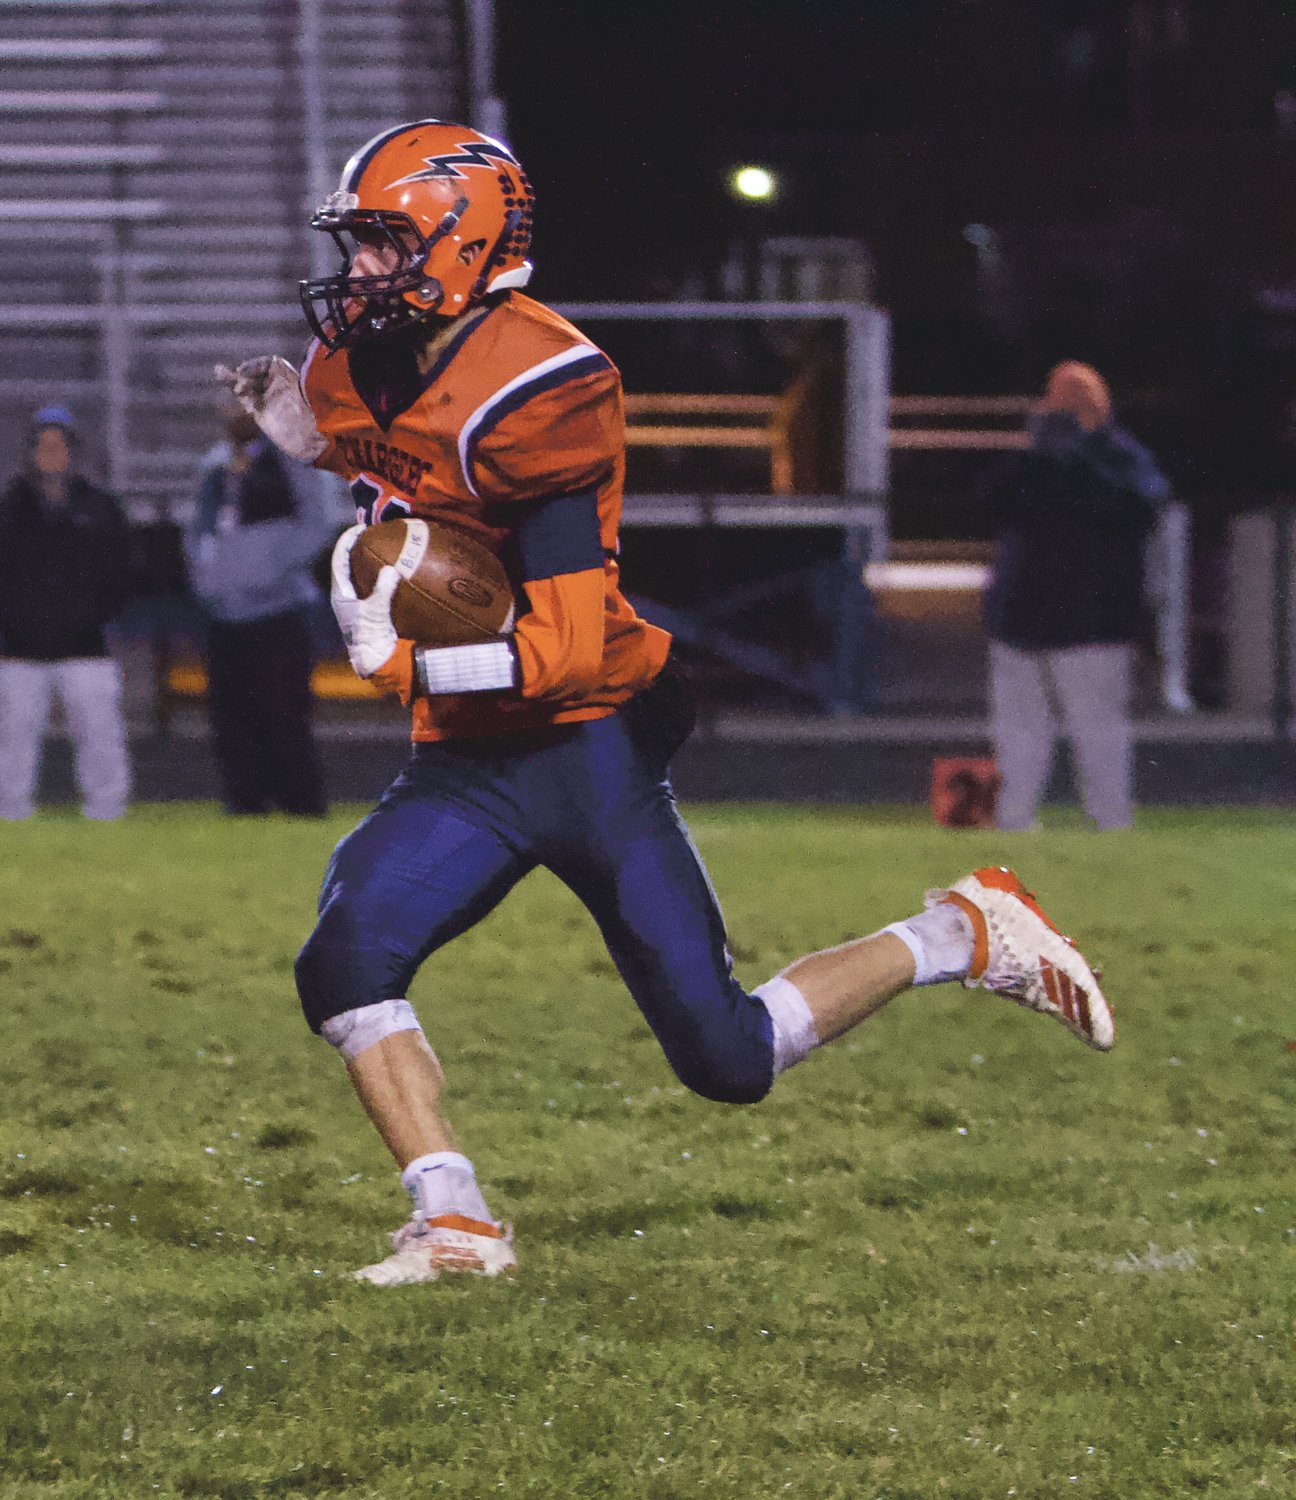 North Montgomery's Kade Kobel caught six passes for 73 yards in the Chargers 49-12 loss.